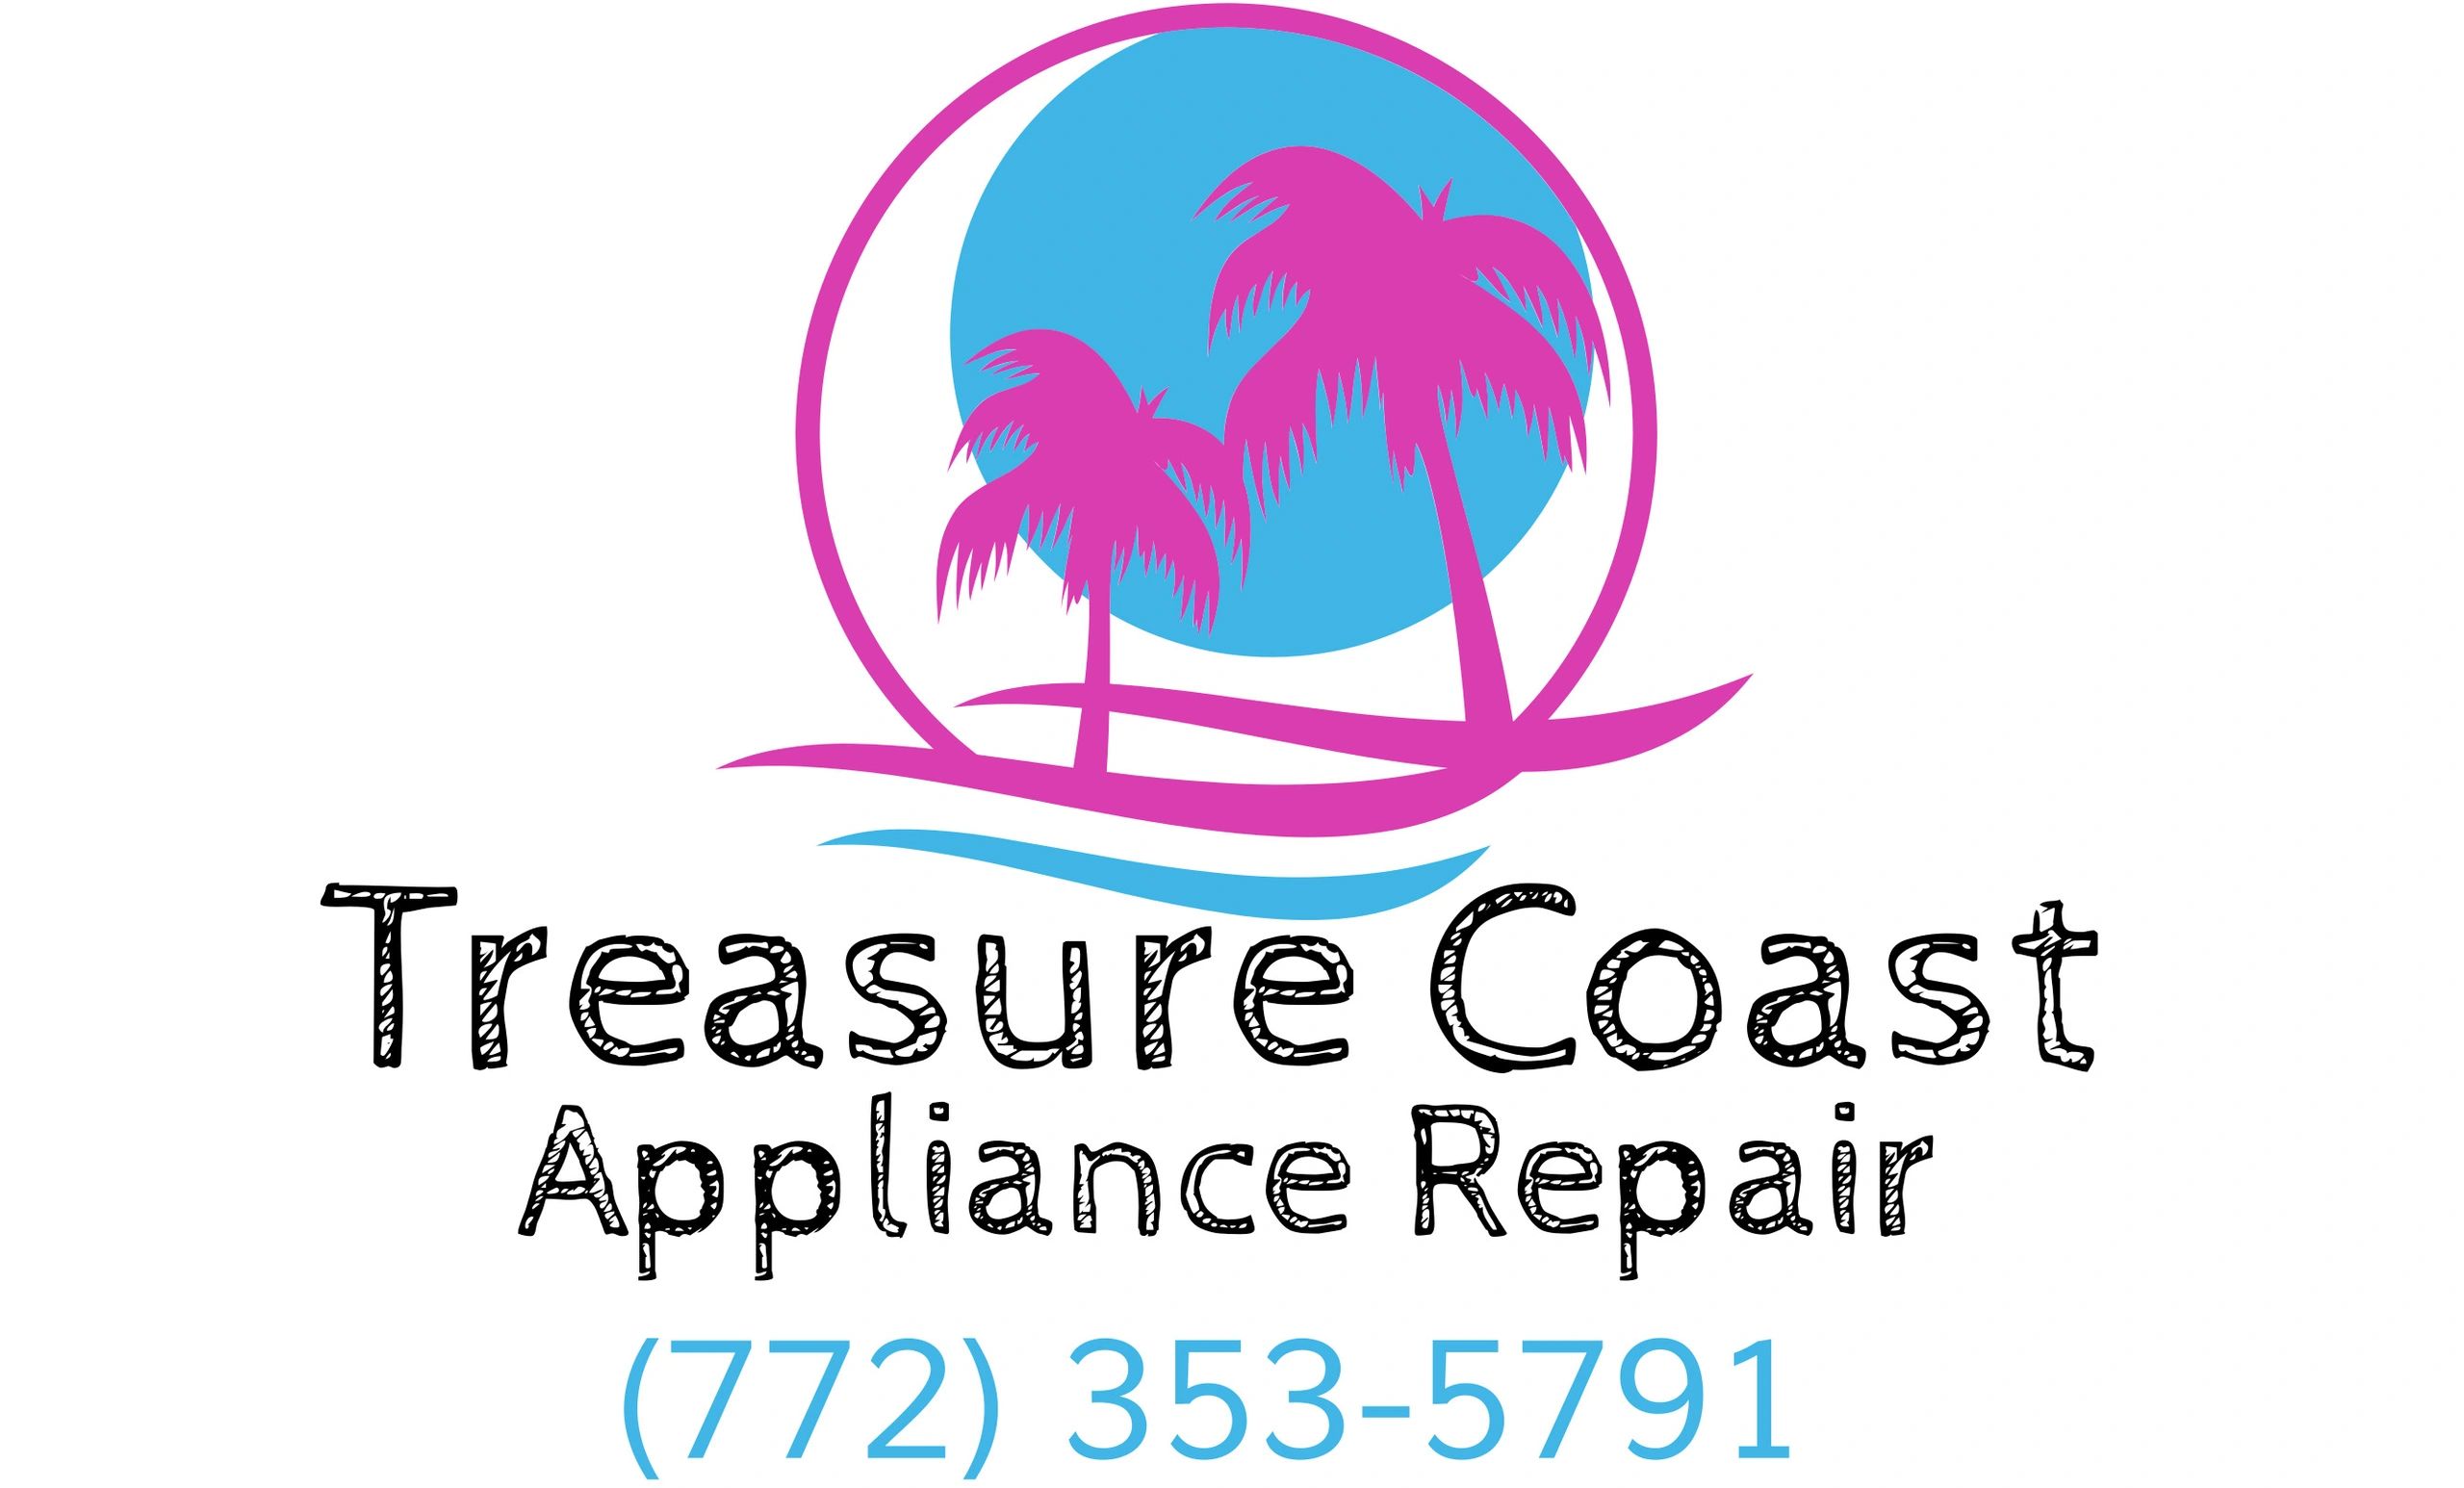 Appliance repair Treasure coast Dryer washer refrigerator dish washer microwave ovens built in 